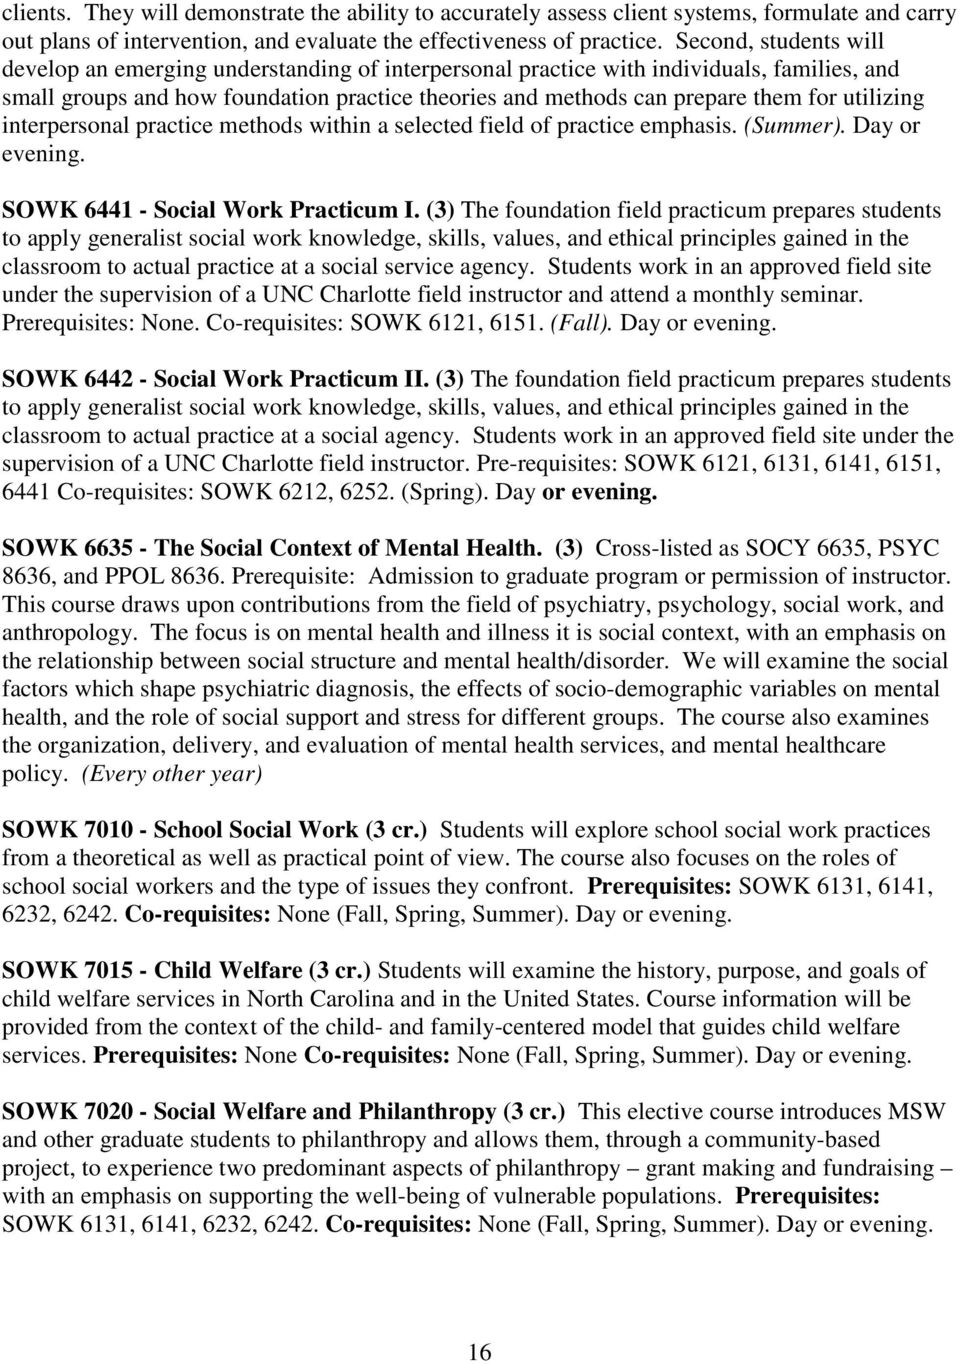 utilizing interpersonal practice methods within a selected field of practice emphasis. (Summer). Day or evening. SOWK 6441 - Social Work Practicum I.